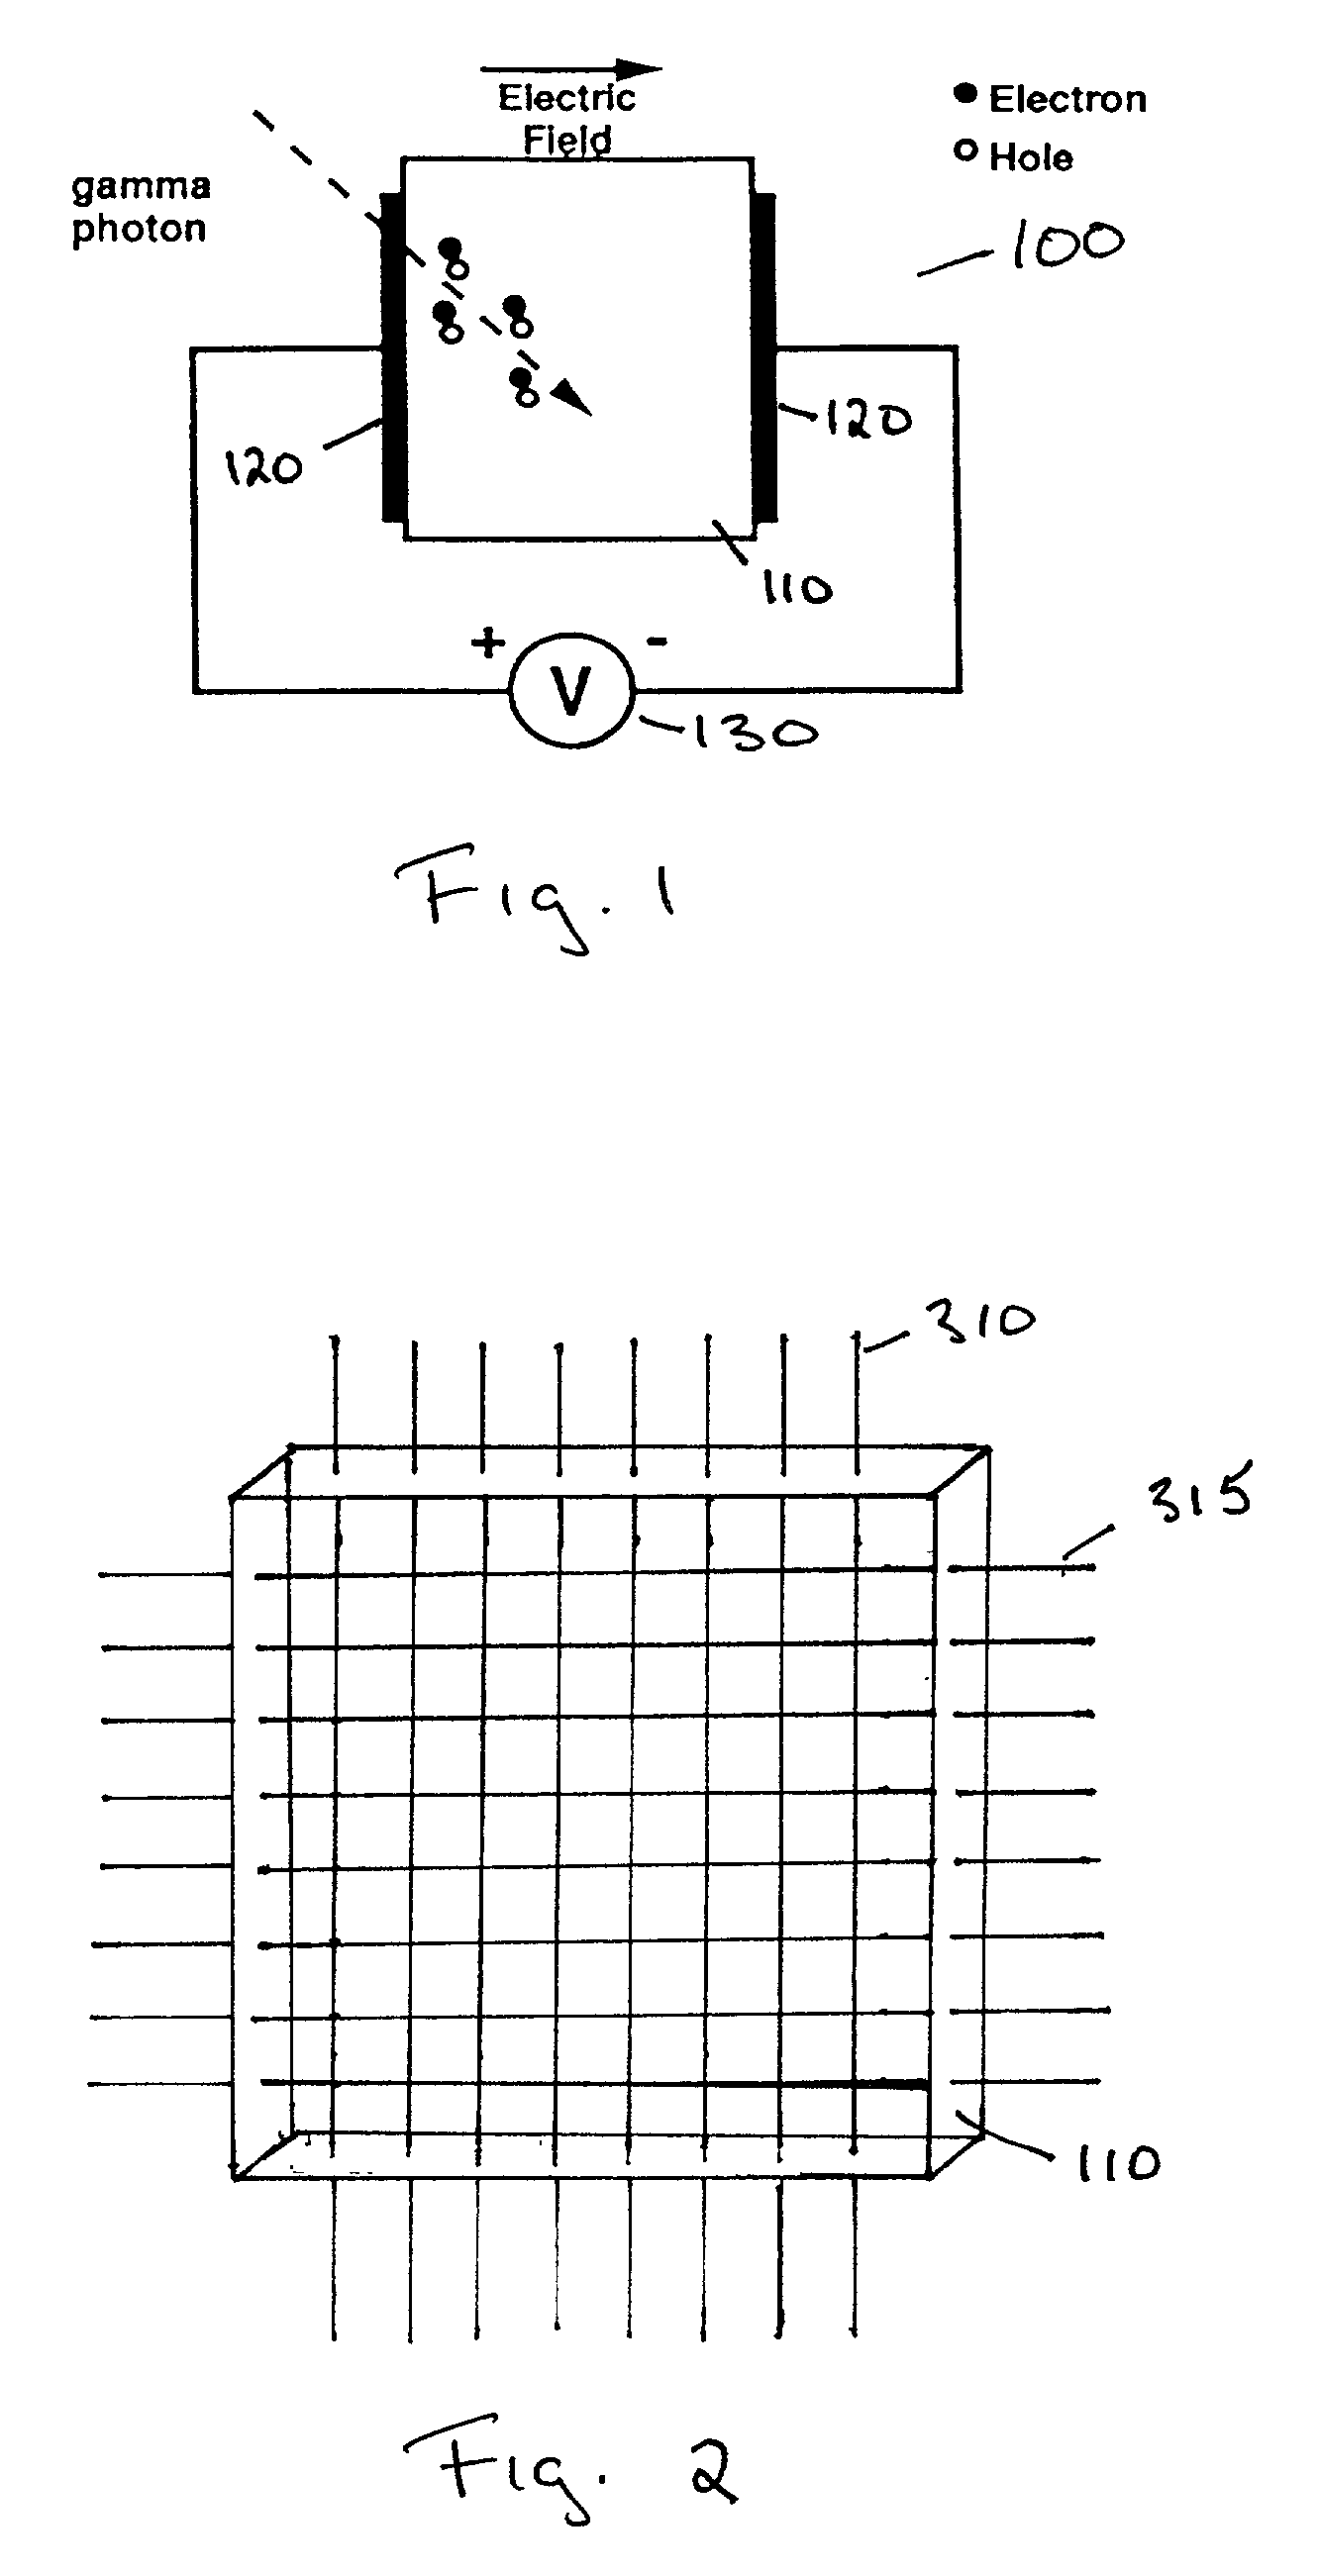 Organic materials and devices for detecting ionizing radiation